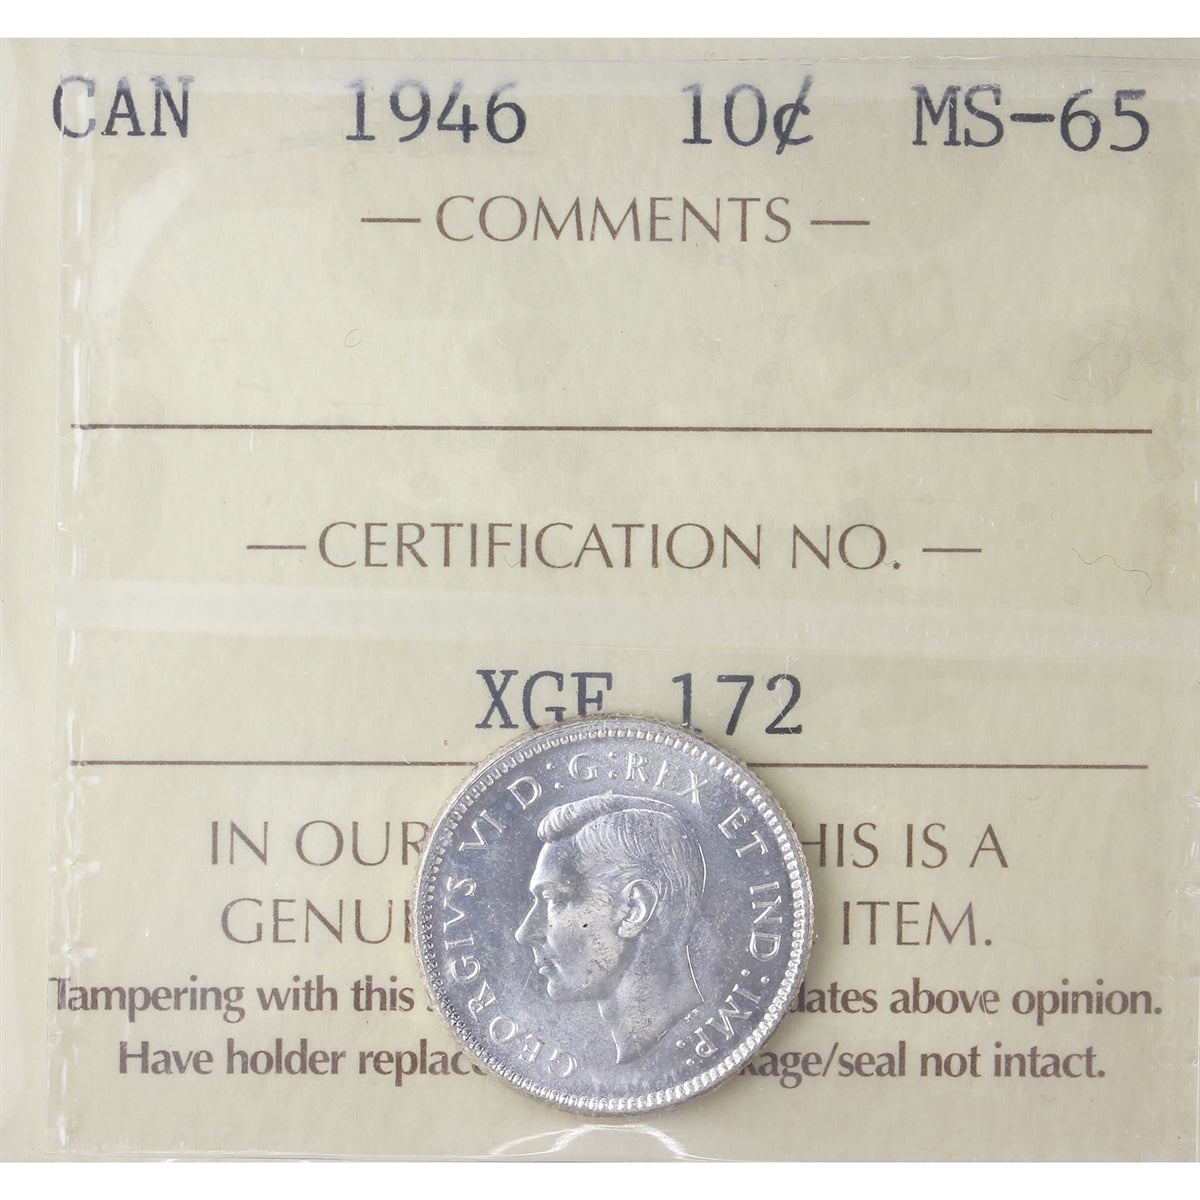 1946 Canada 10-cents ICCS Certified MS-65 (XGE 172)